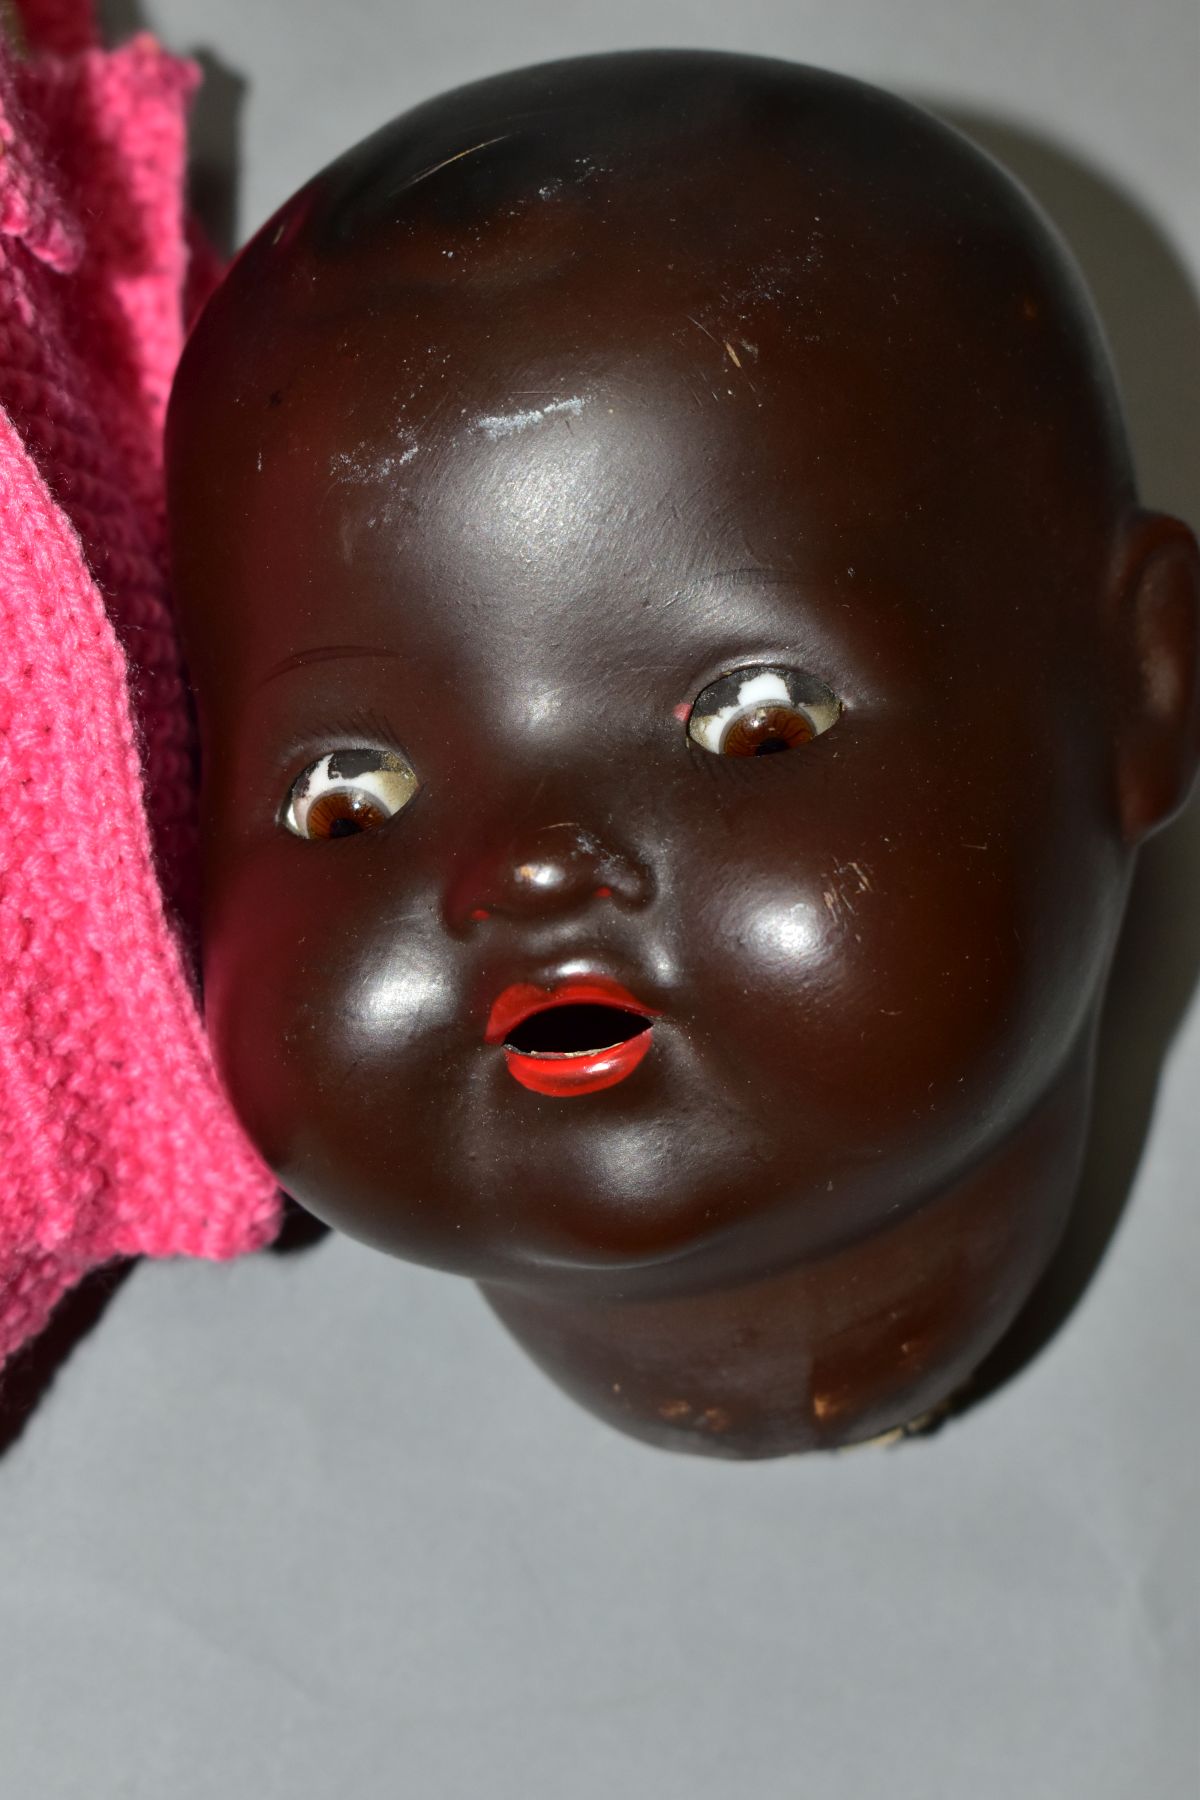 A BISQUE HEAD BABY DOLL, nape of neck marked 'Germany H W 4 350', so possibly Hugo Wiegand, sleeping - Image 5 of 7